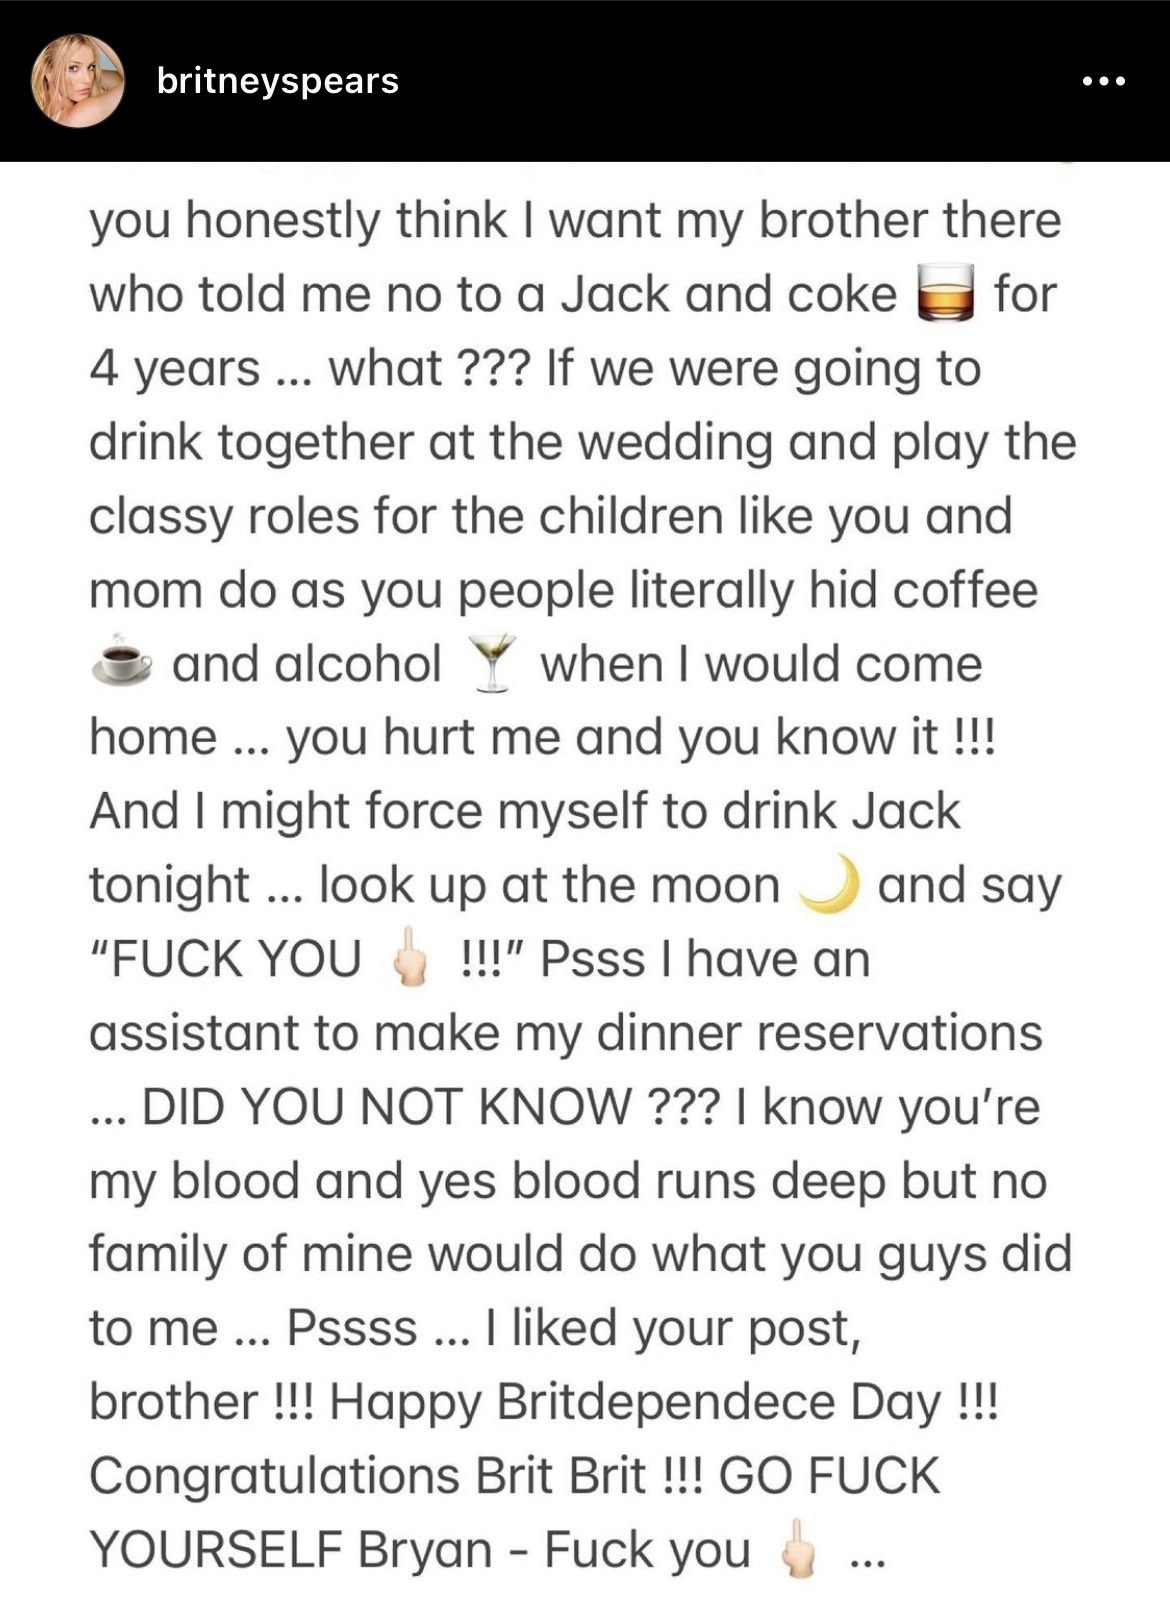 Britney says she might force herself to have a Jack and Coke, Bryan&#x27;s favorite drink, before saying &quot;go fuck yourself&quot; and &quot;fuck you&quot; to Bryan multiple times